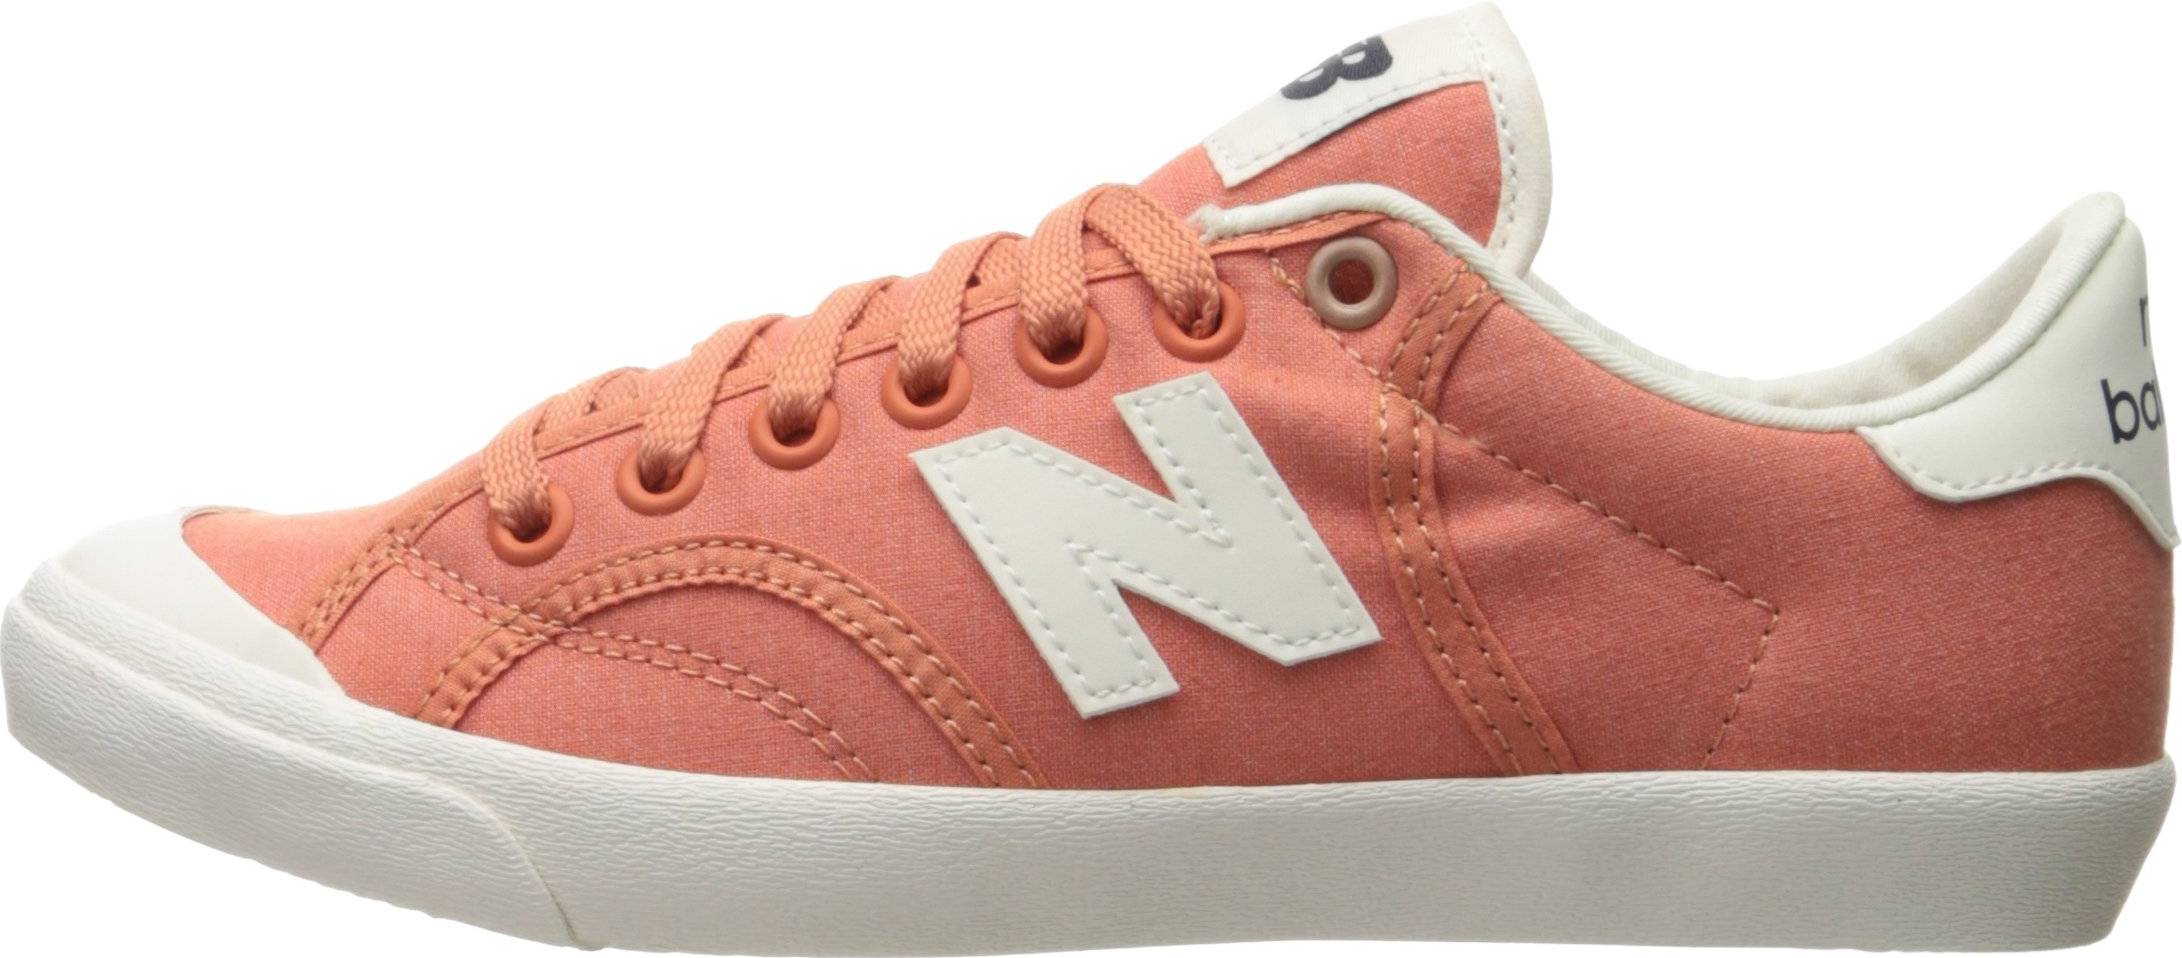 New Balance Pro Court sneakers (only £28) | RunRepeat